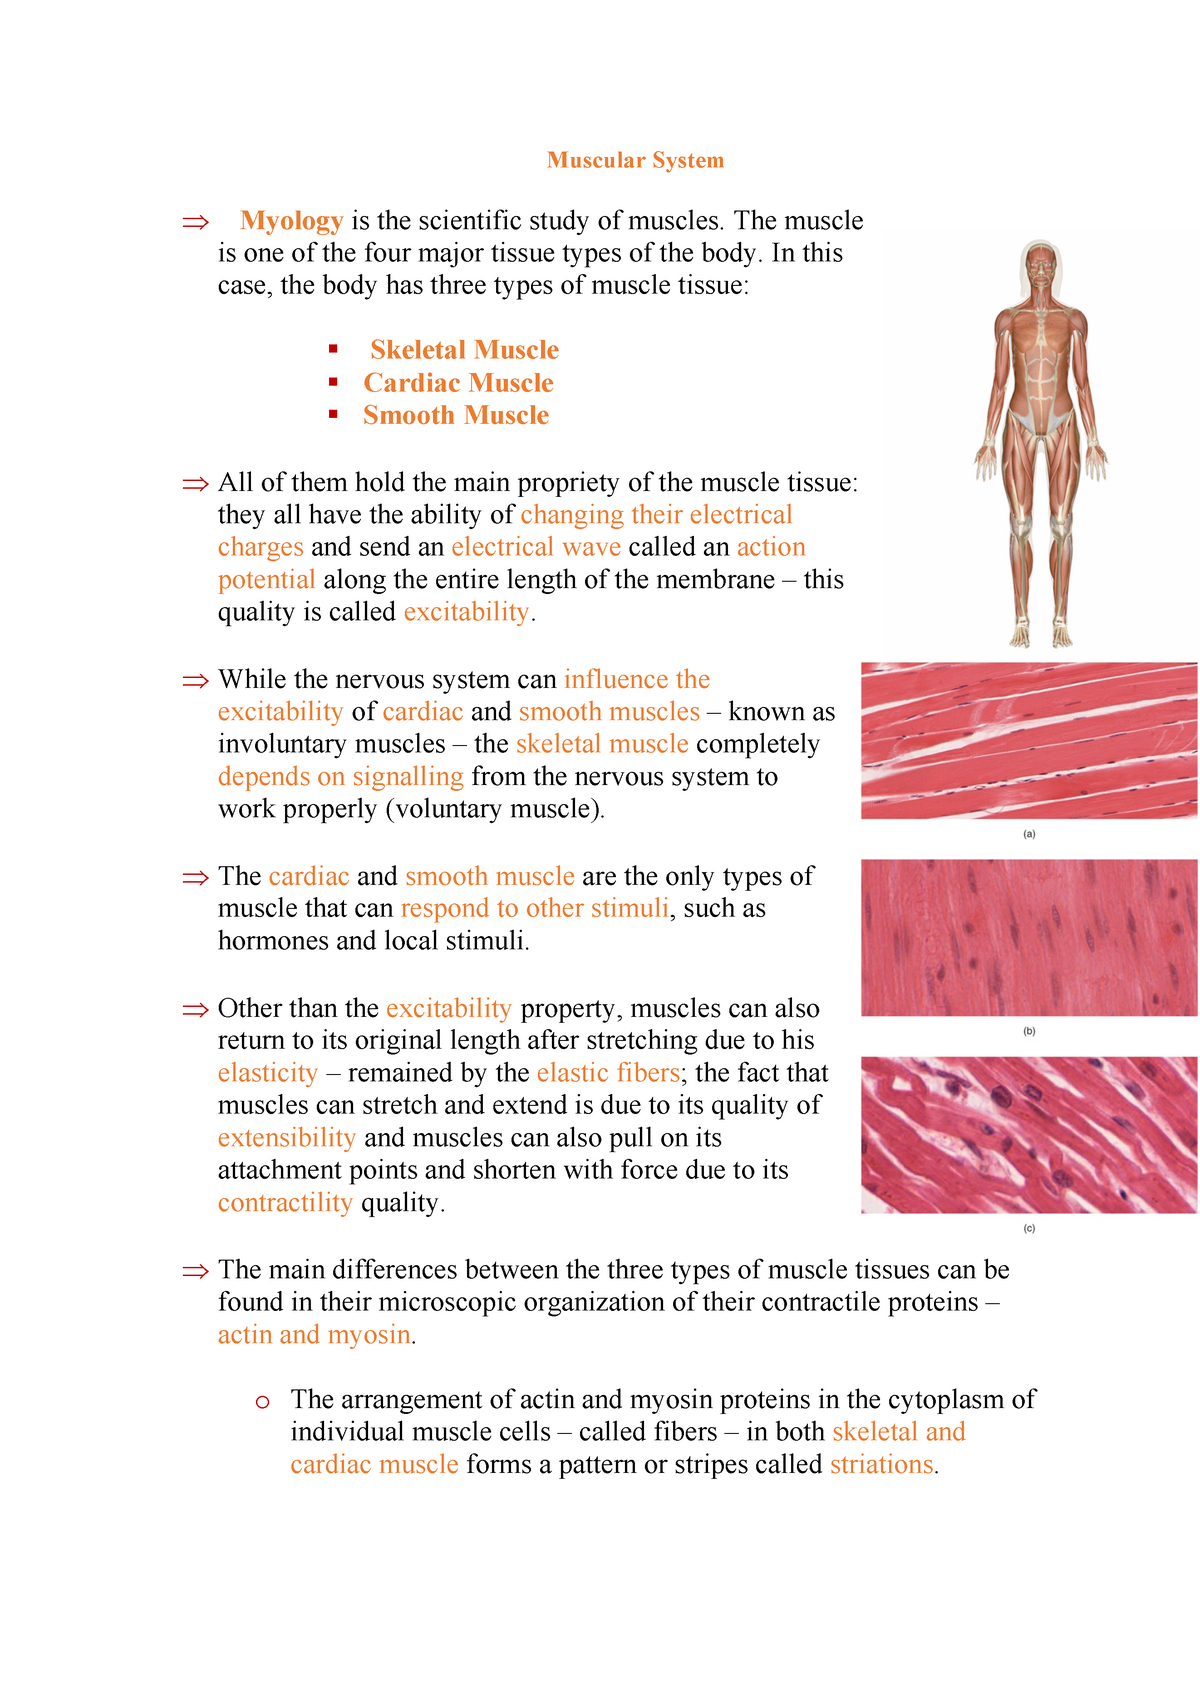 Muscular System Review Warning Tt Undefined Function 32 Muscular System Þ Myology Is The 9909